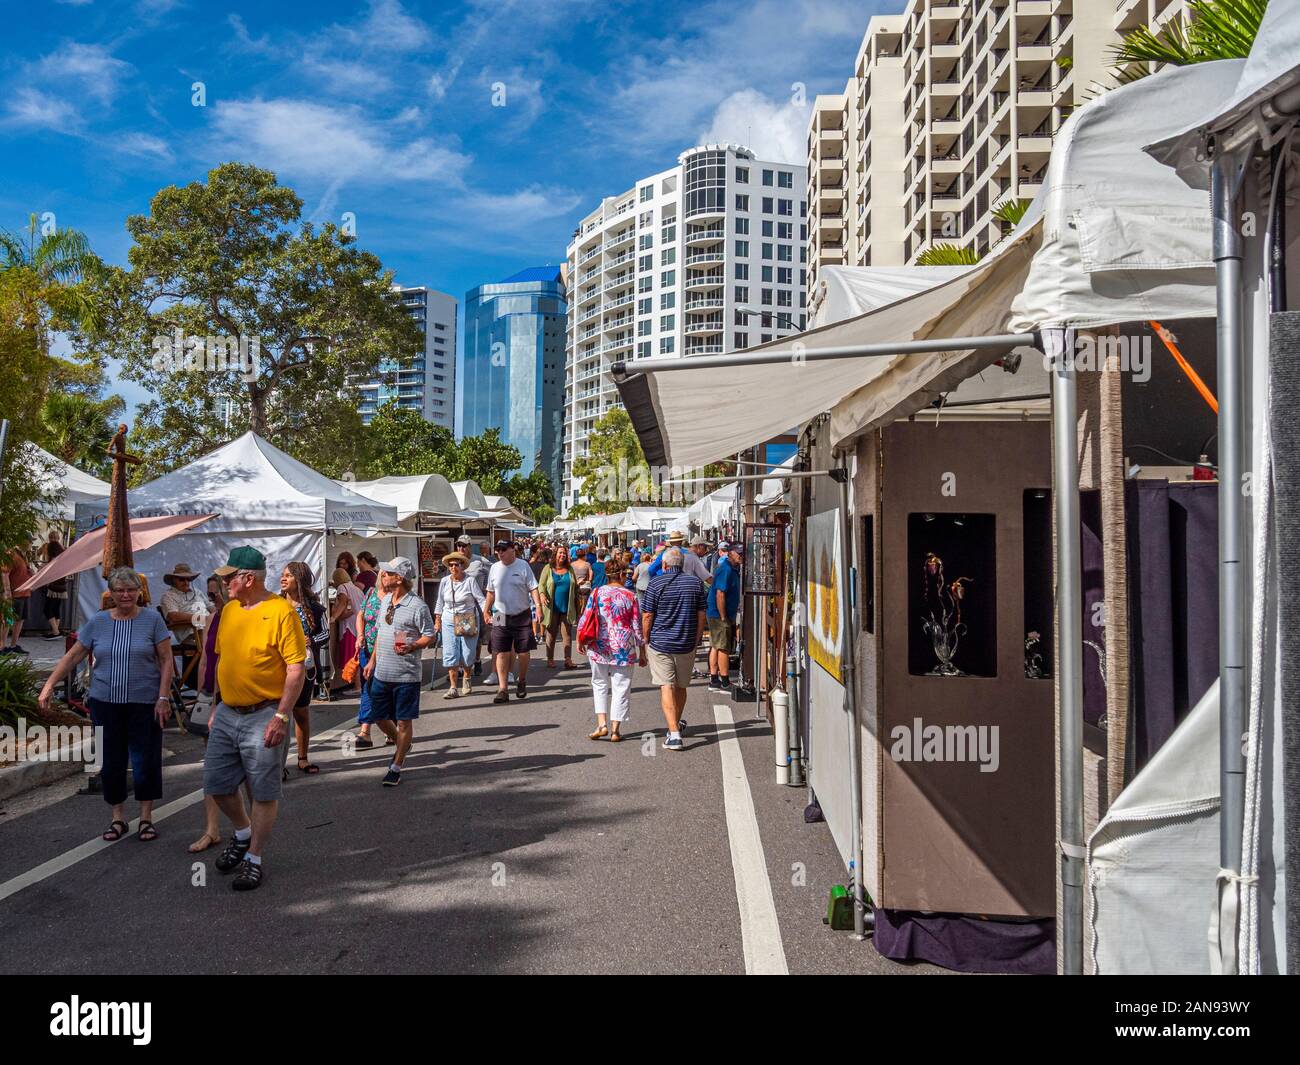 Art Craft Show On The Streets Of Downtown Sarasota Florida United States Stock Photo Alamy